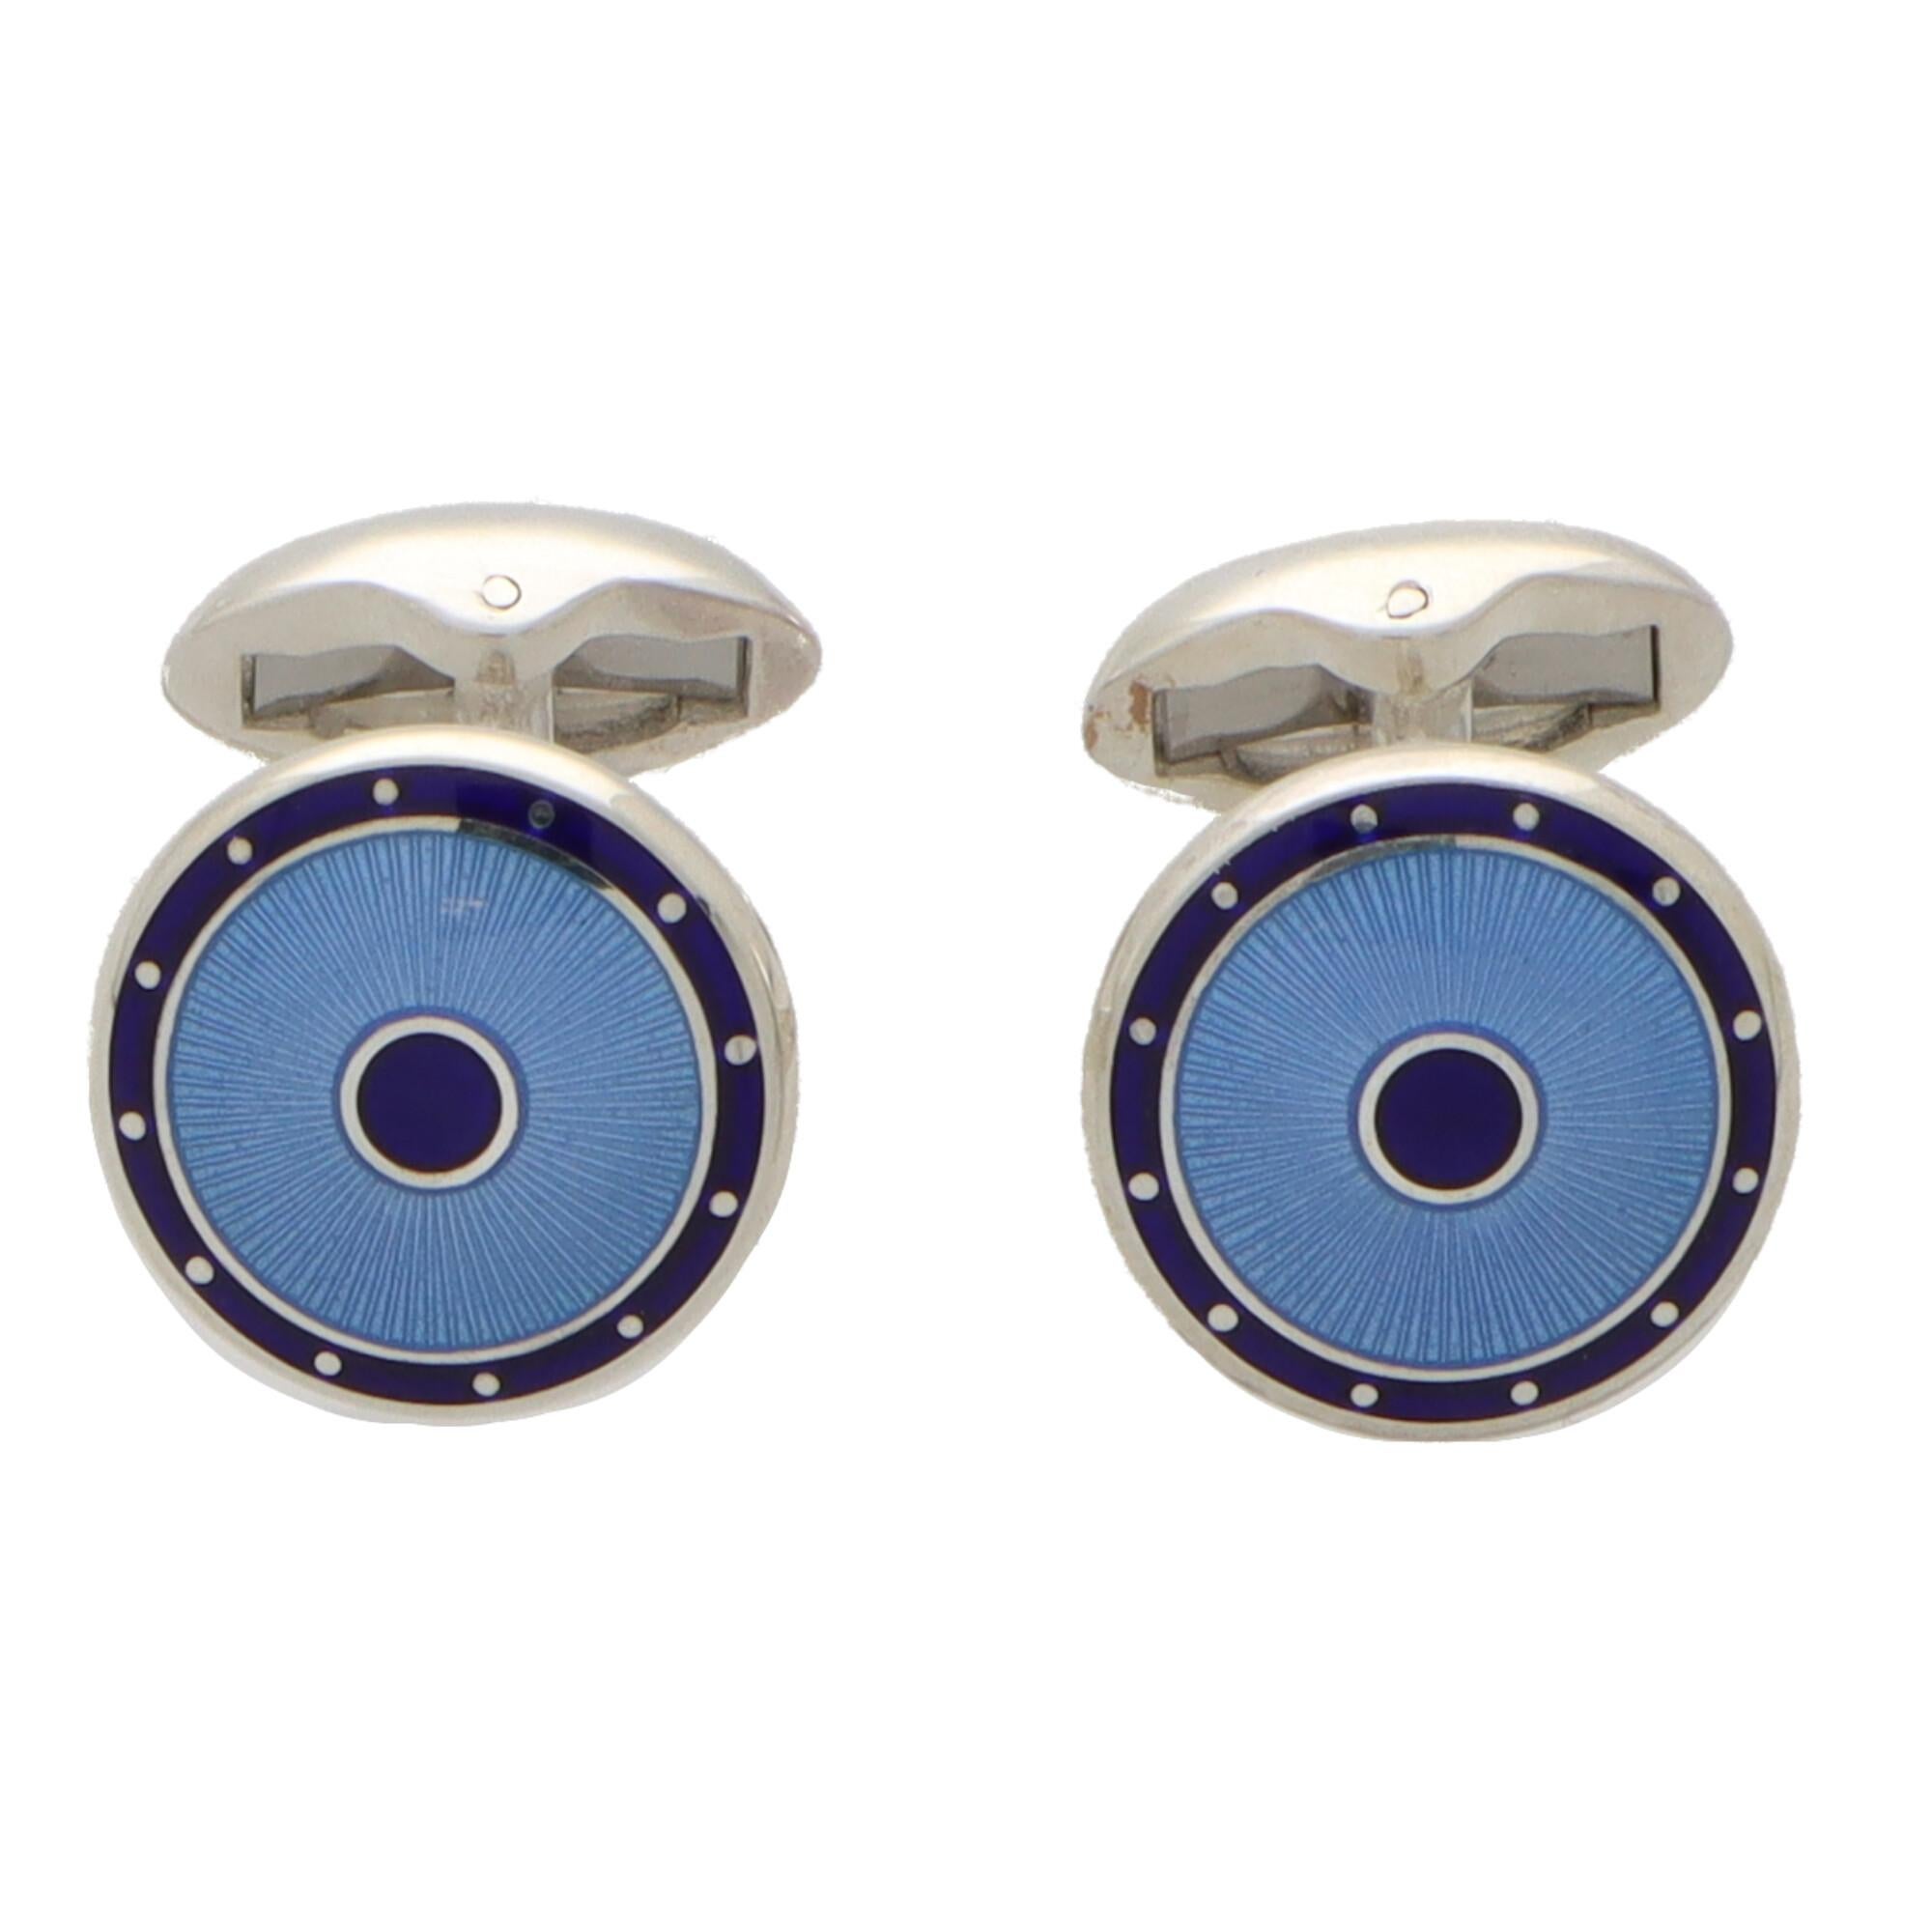 An extremely stylish pair of navy and light blue rounded shield swivel back cufflinks made in British sterling silver.

Each cufflink is composed of two rounded shield faces set centrally with a navy-blue circle and bordered blue light textured